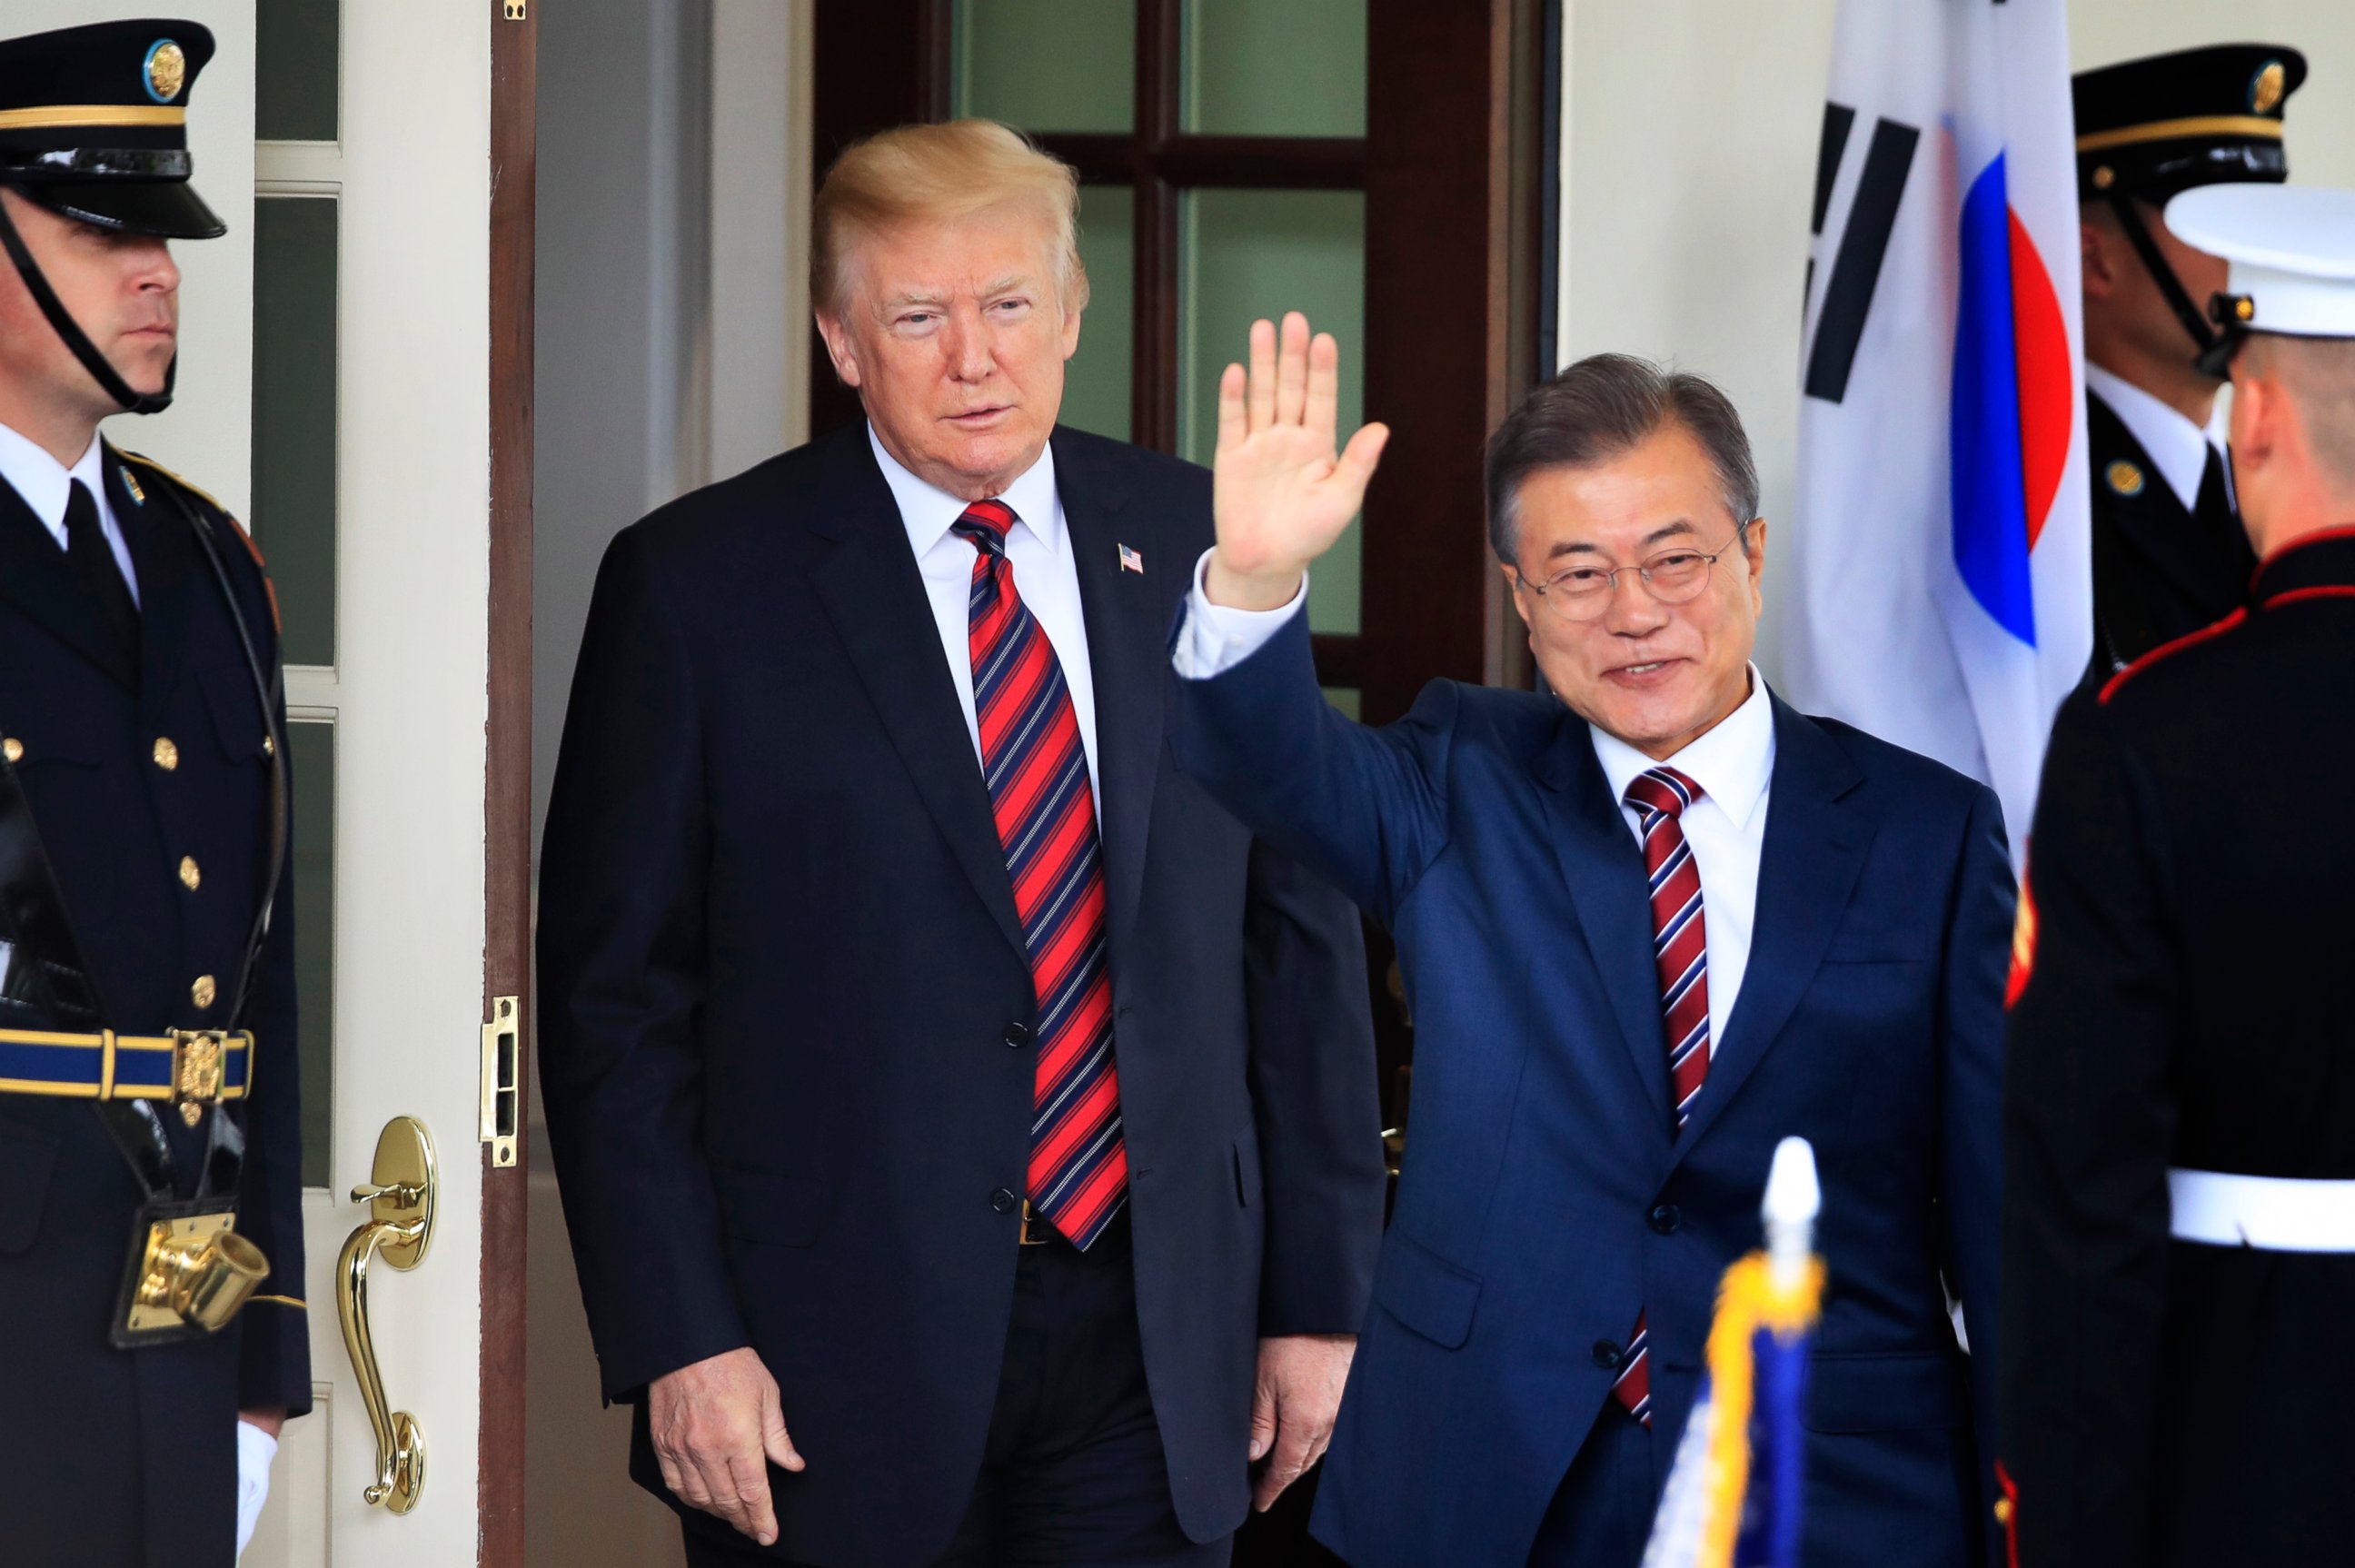 PHOTO: In this May 22, 2018, file photo, South Korean President Moon Jae-in waves as he is welcomed by U.S. President Donald Trump to the White House in Washington.